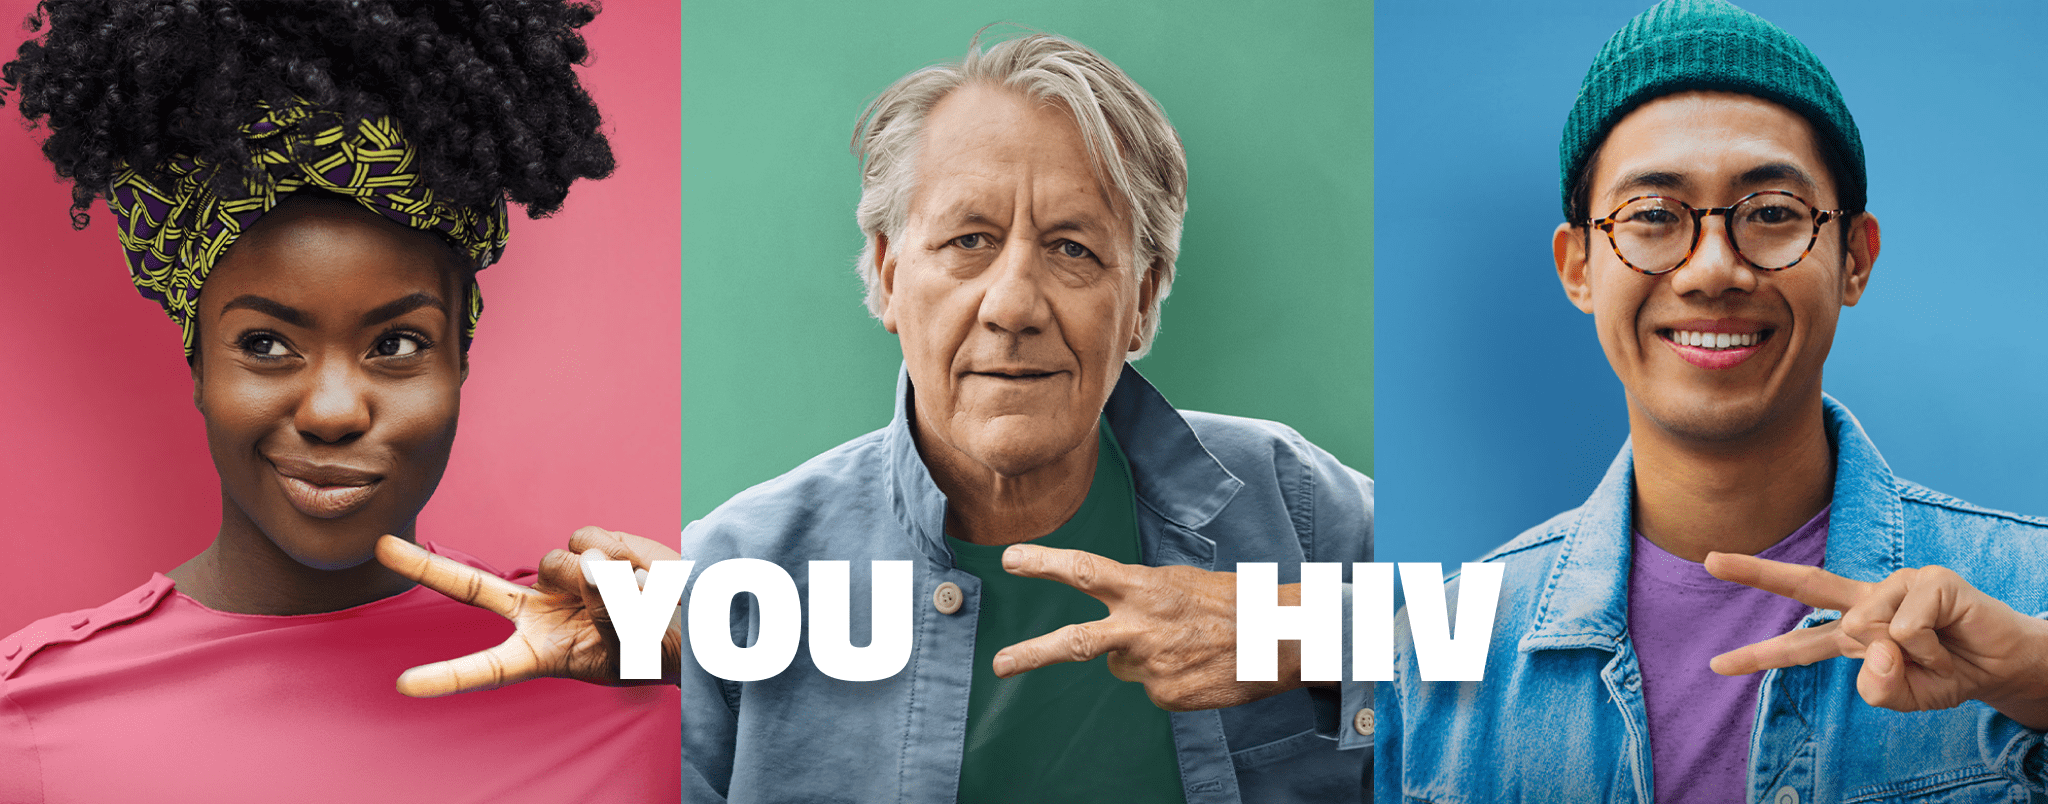 YOU > HIV
                Young woman, older man and younger man making the “>” sign with their hands, on a pink/green/blue background.